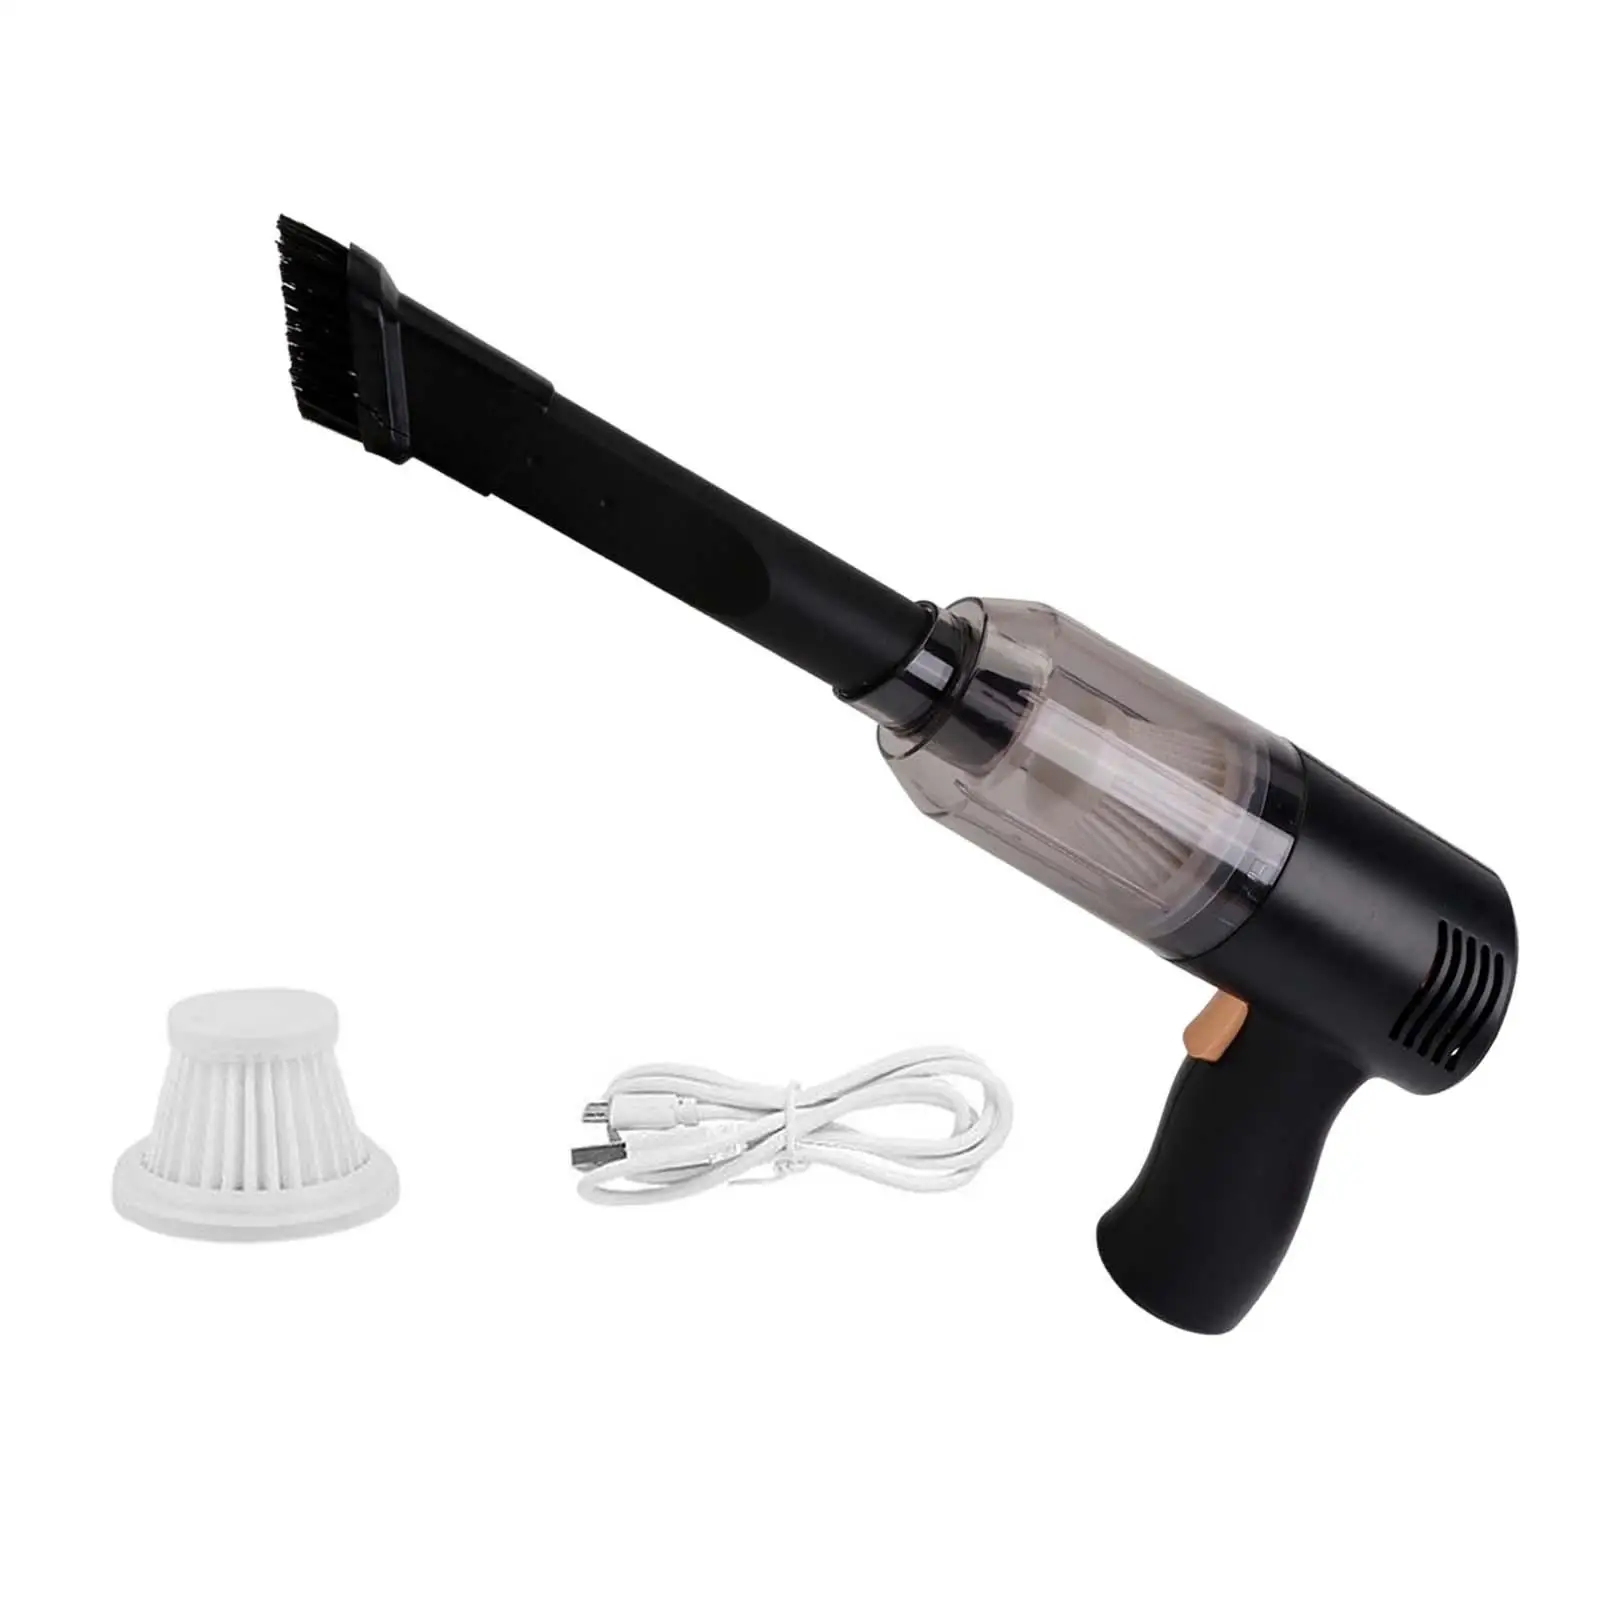 Mini Car Vacuum Cleaner Easy to Clean Portable Lightweight High Power Handheld Vacuum Cleaner for Car Interior Home Desk Office